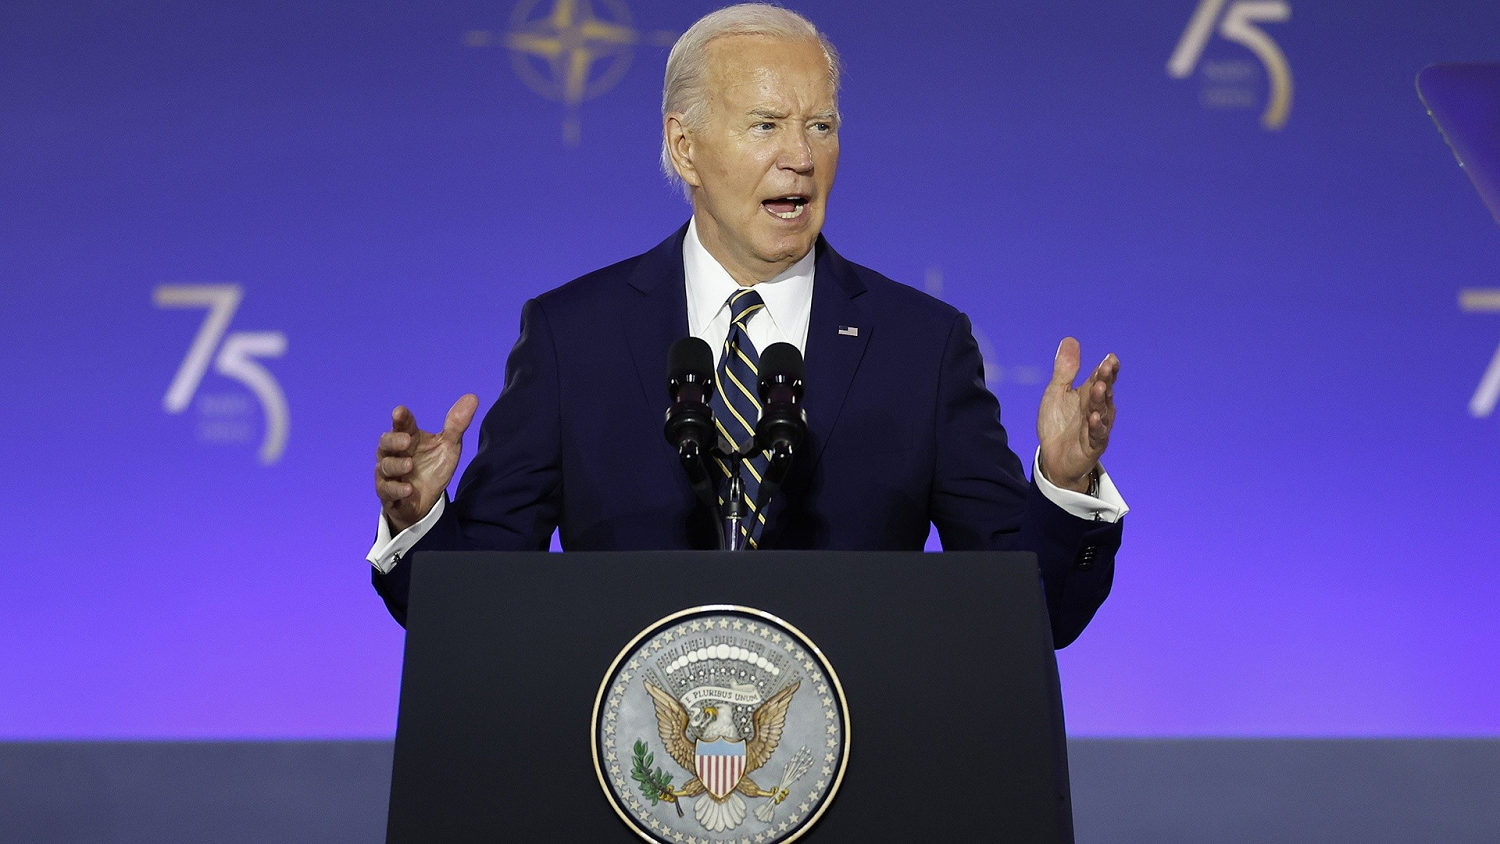 Biden looks to quiet critics with rare solo news conference